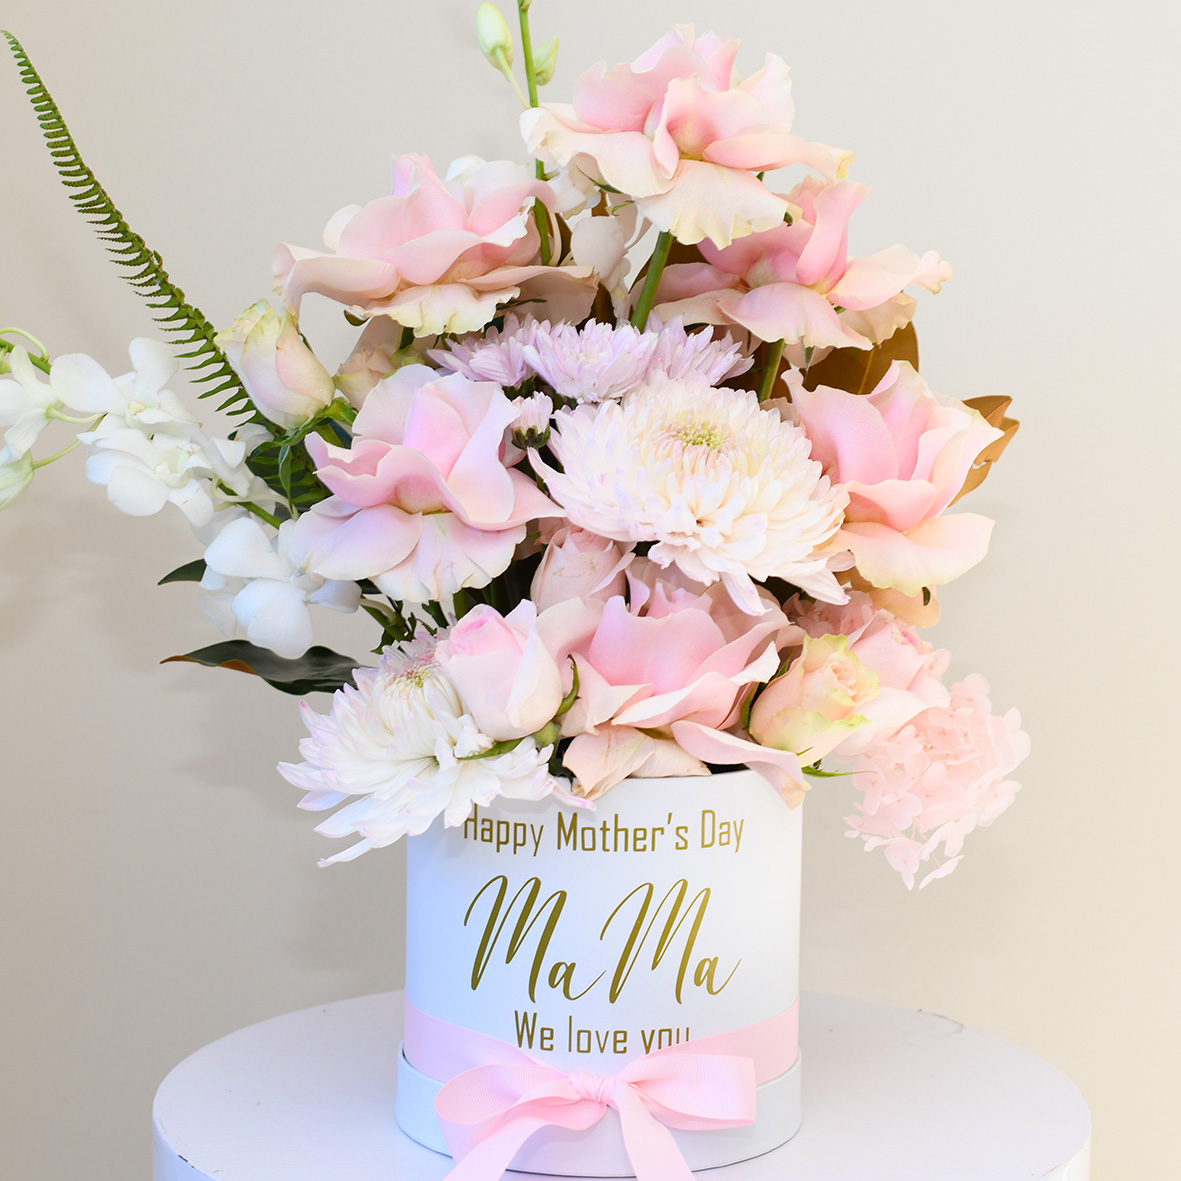 Mother's Day Flowers - Personalised Flowers in a Box Sydney Delivery